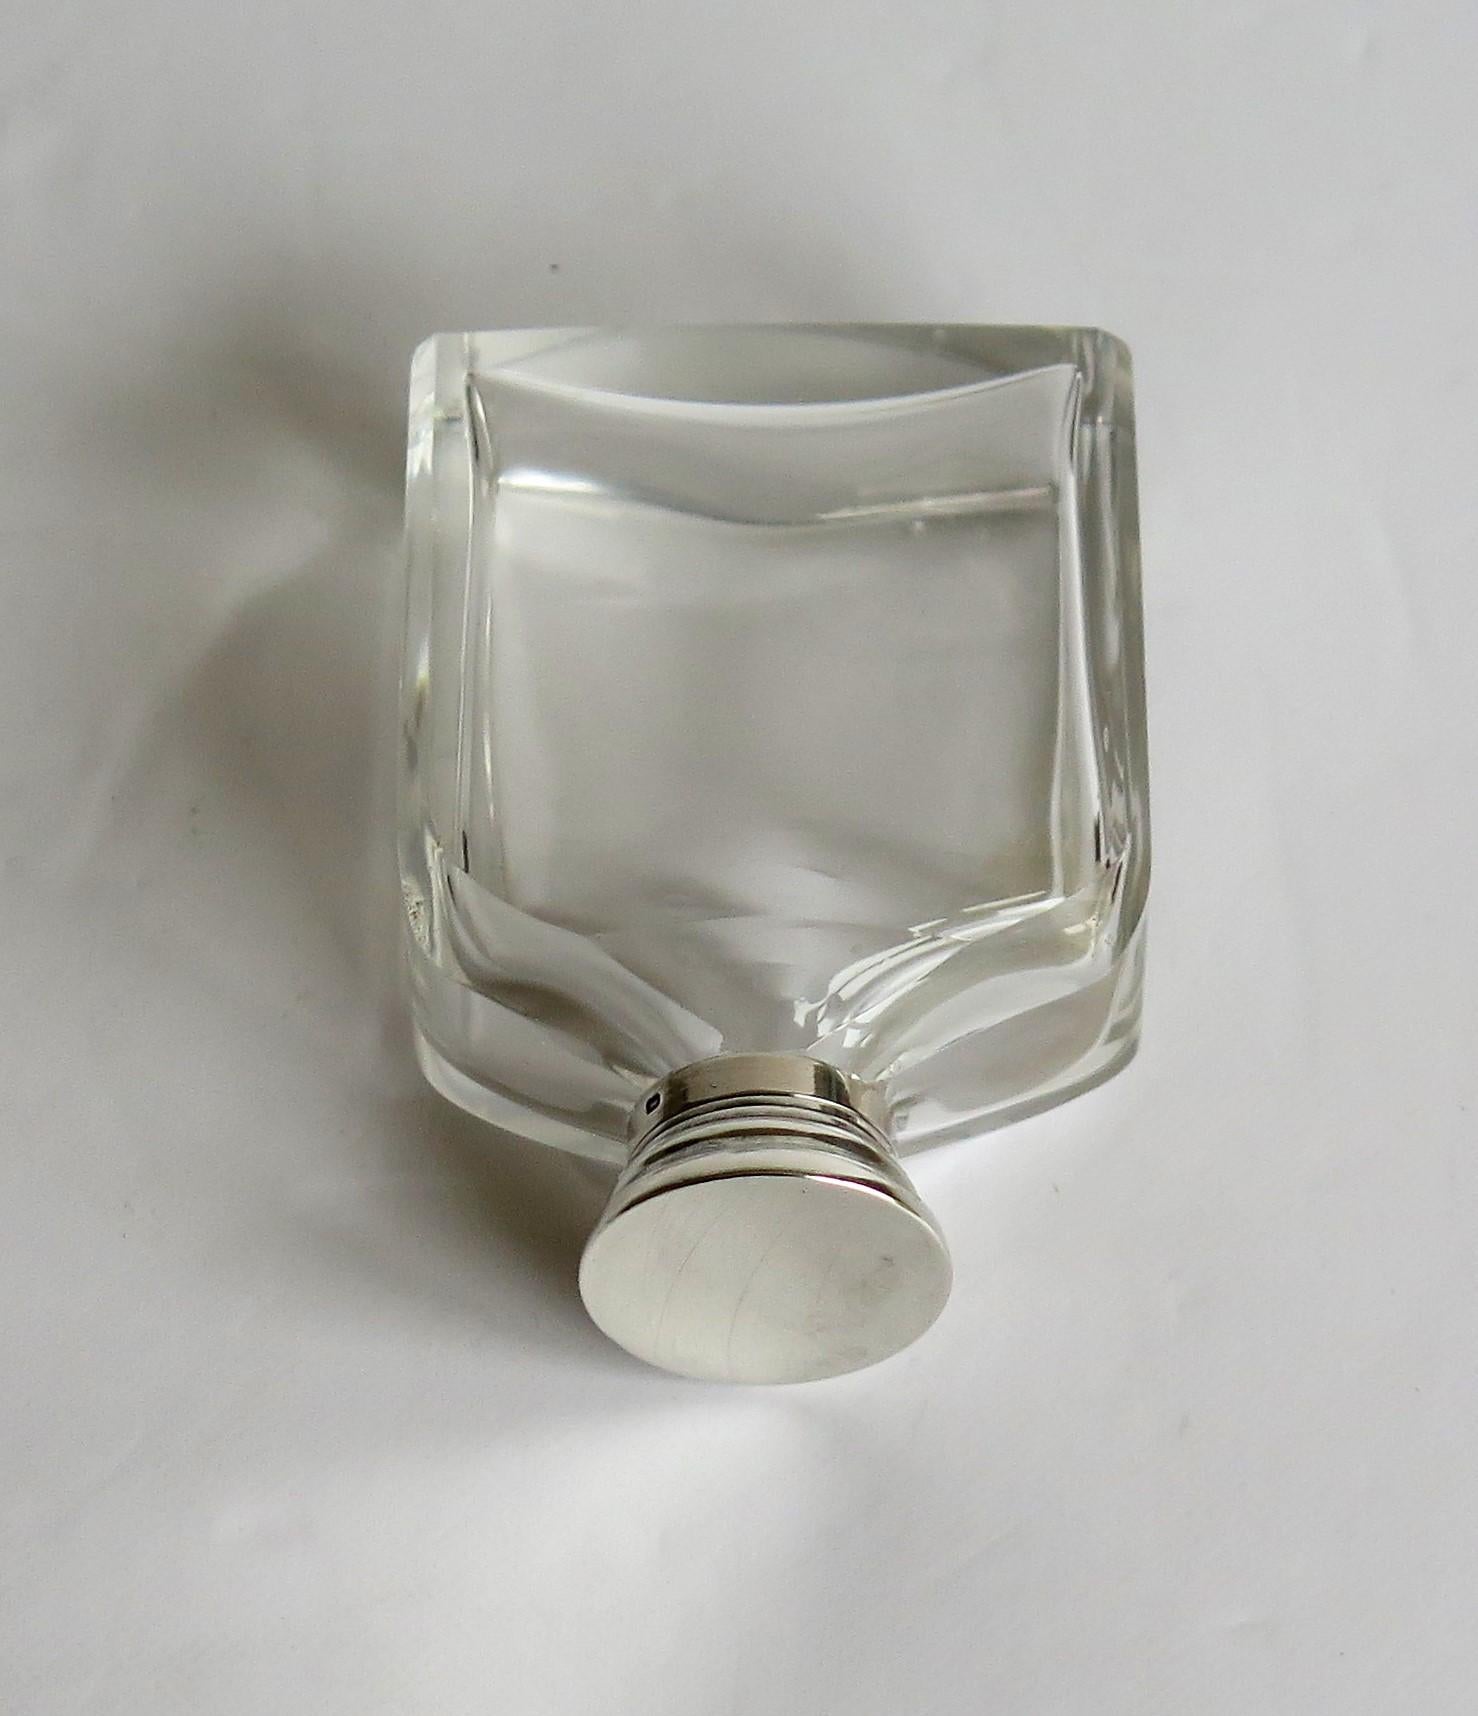 20th Century Crystal Glass Cologne or Perfume Bottle with Sterling Silver Top, circa 1910